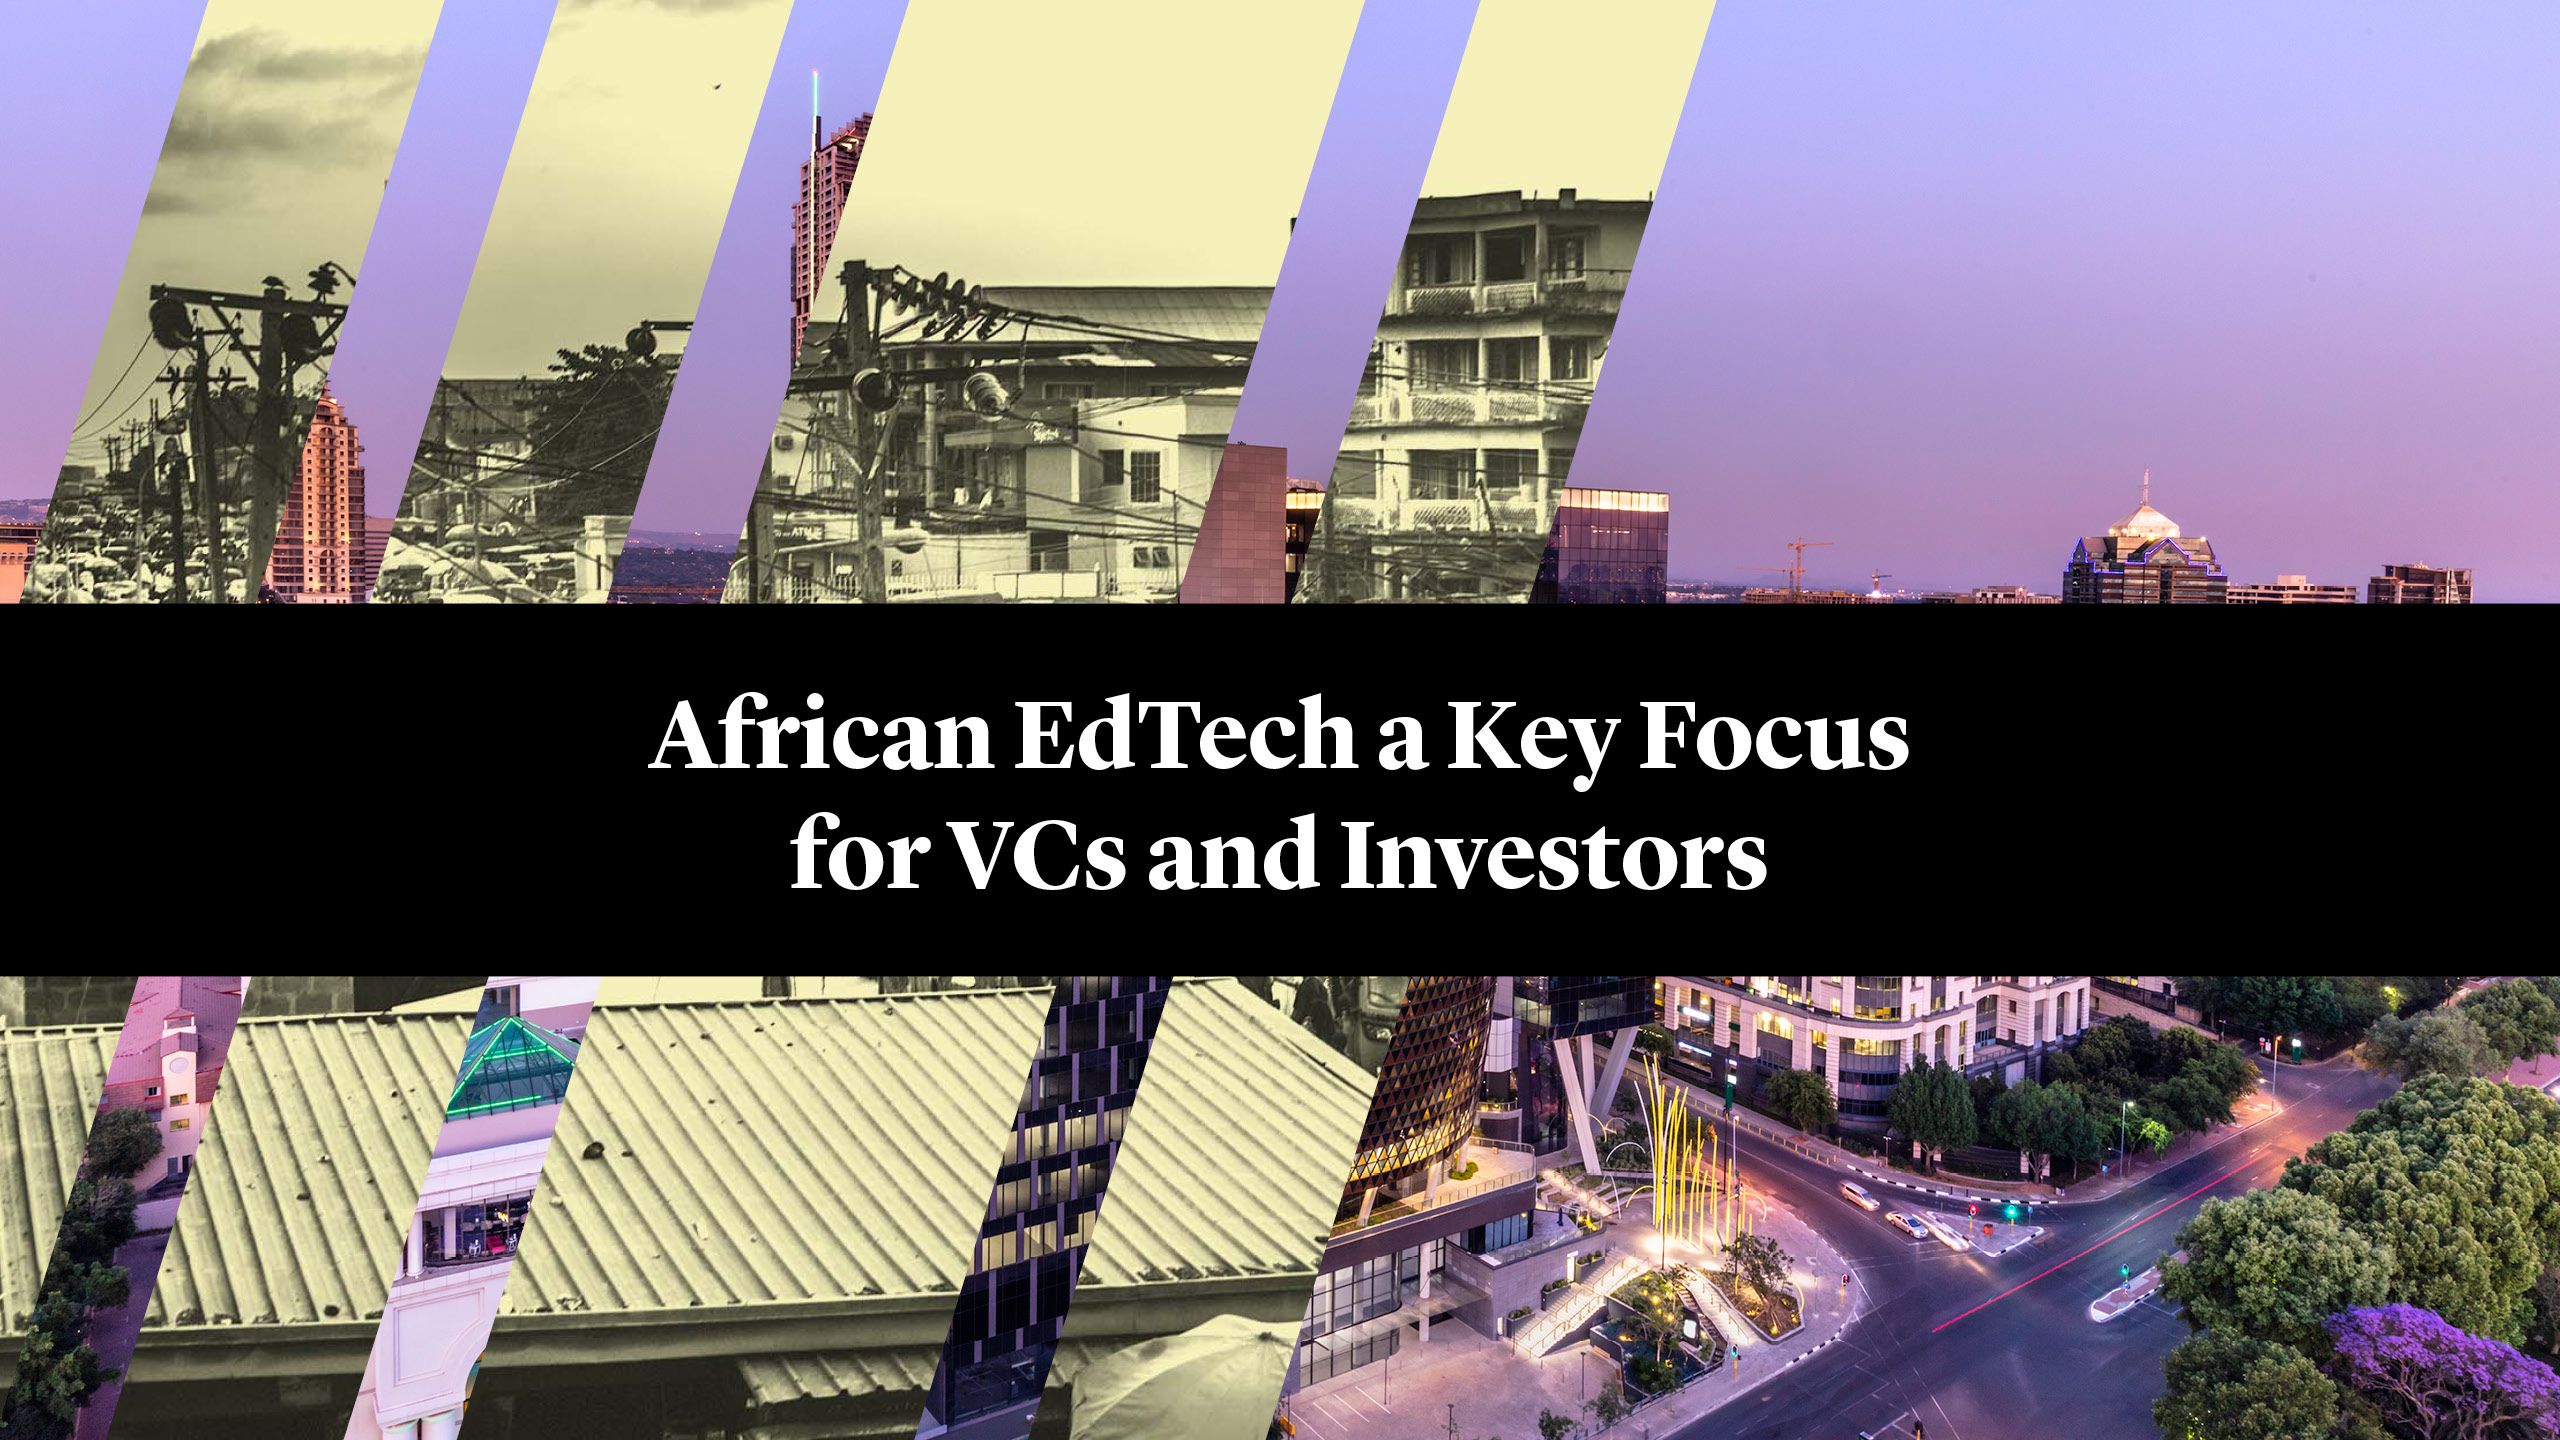 African EdTech a Key Focus for VCs and Investors